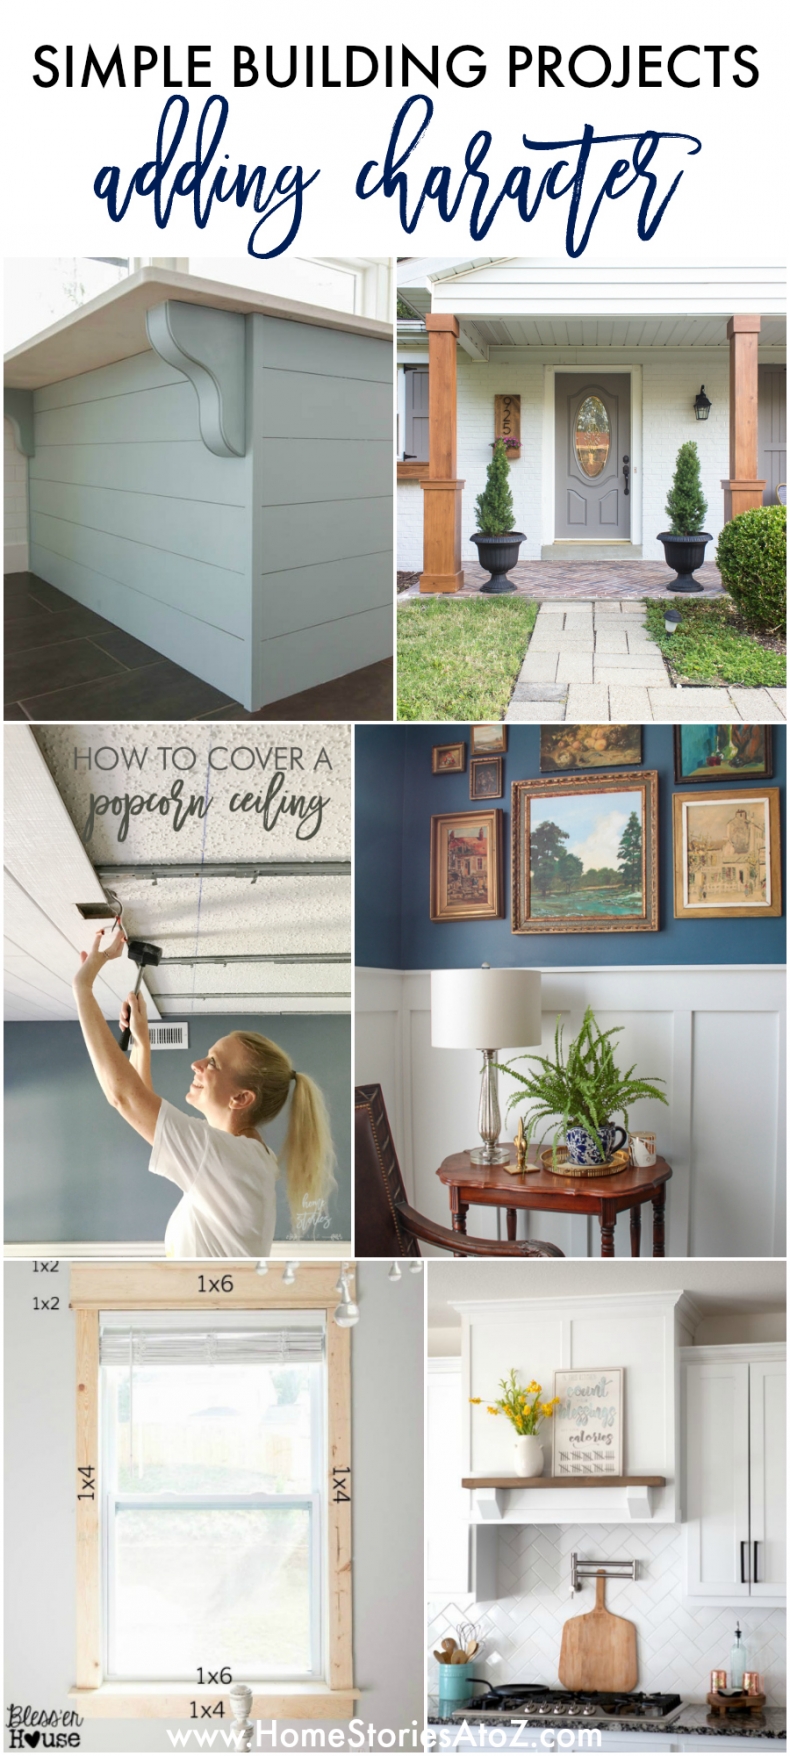 Diy Building Projects 20 Simple